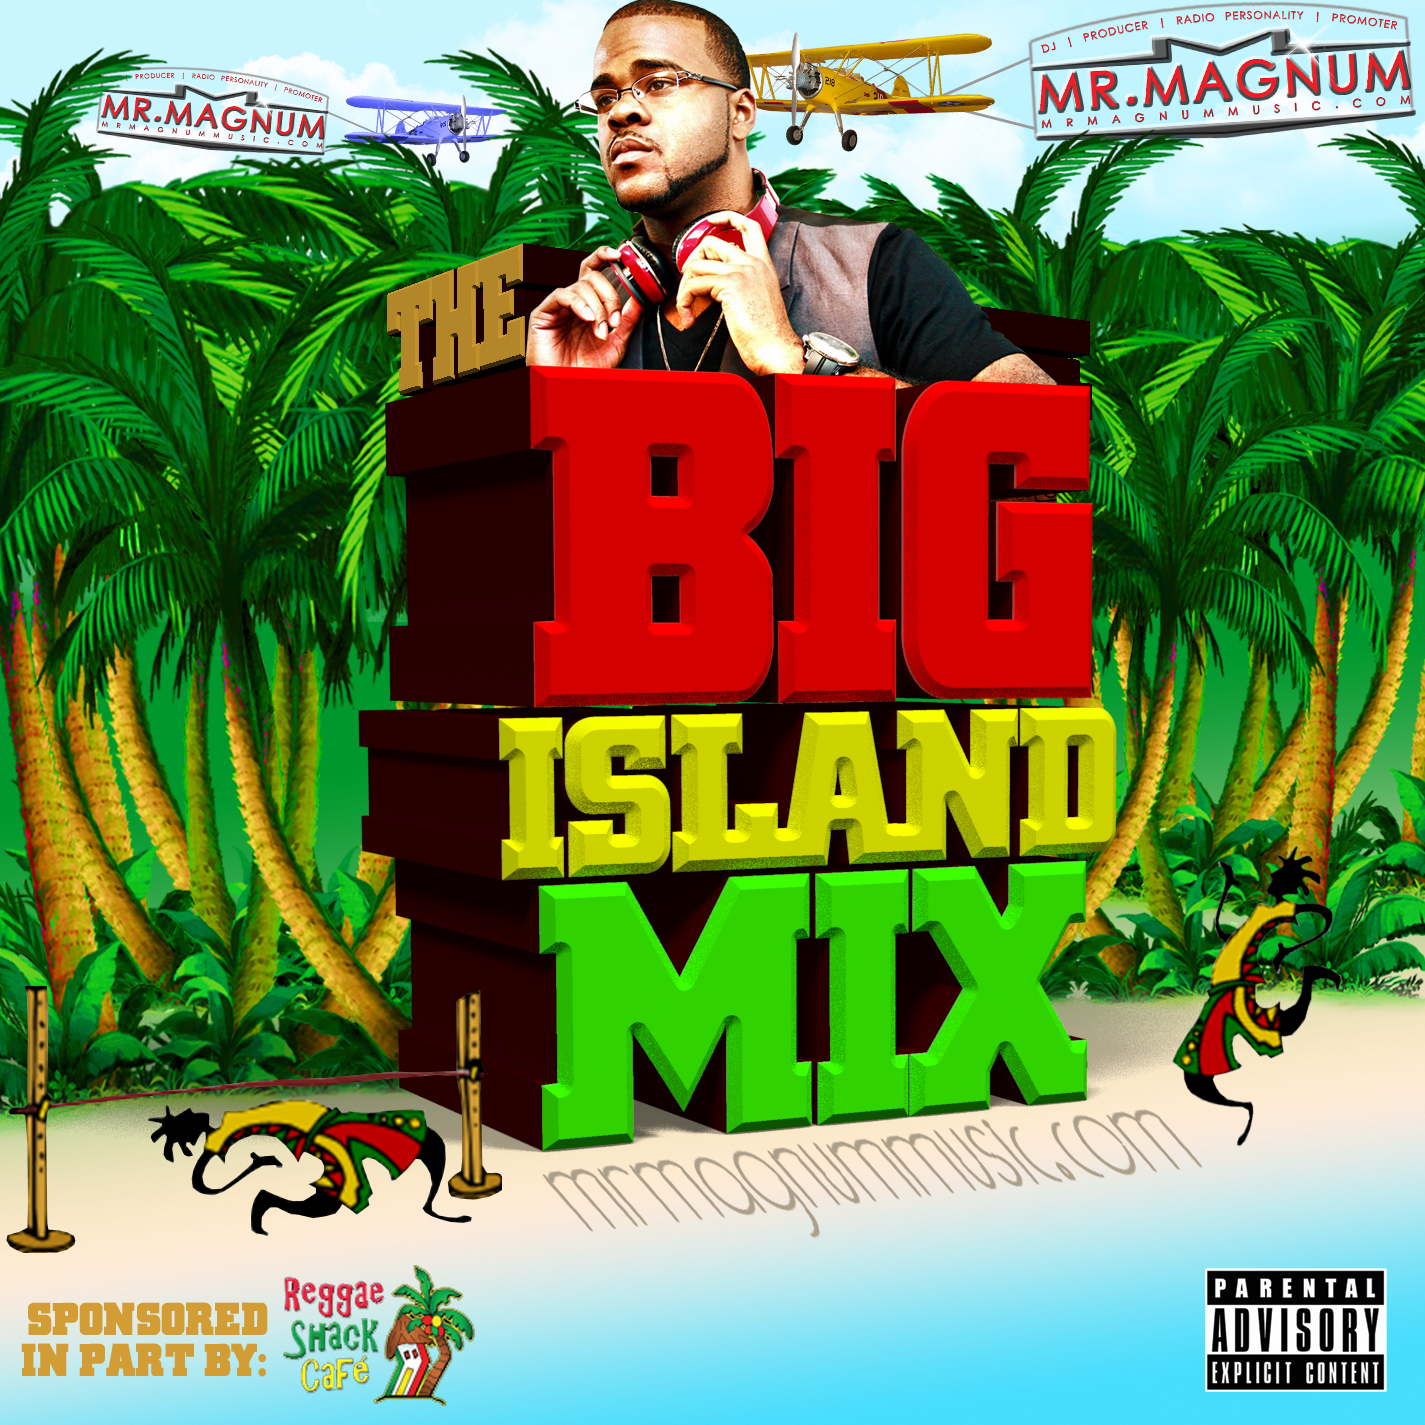 The Big Island Mix (Sponsored By Reggae Shack Cafe) - A high energy mix of music from the caribbean by your favorite DJ, Mr. Magnum.